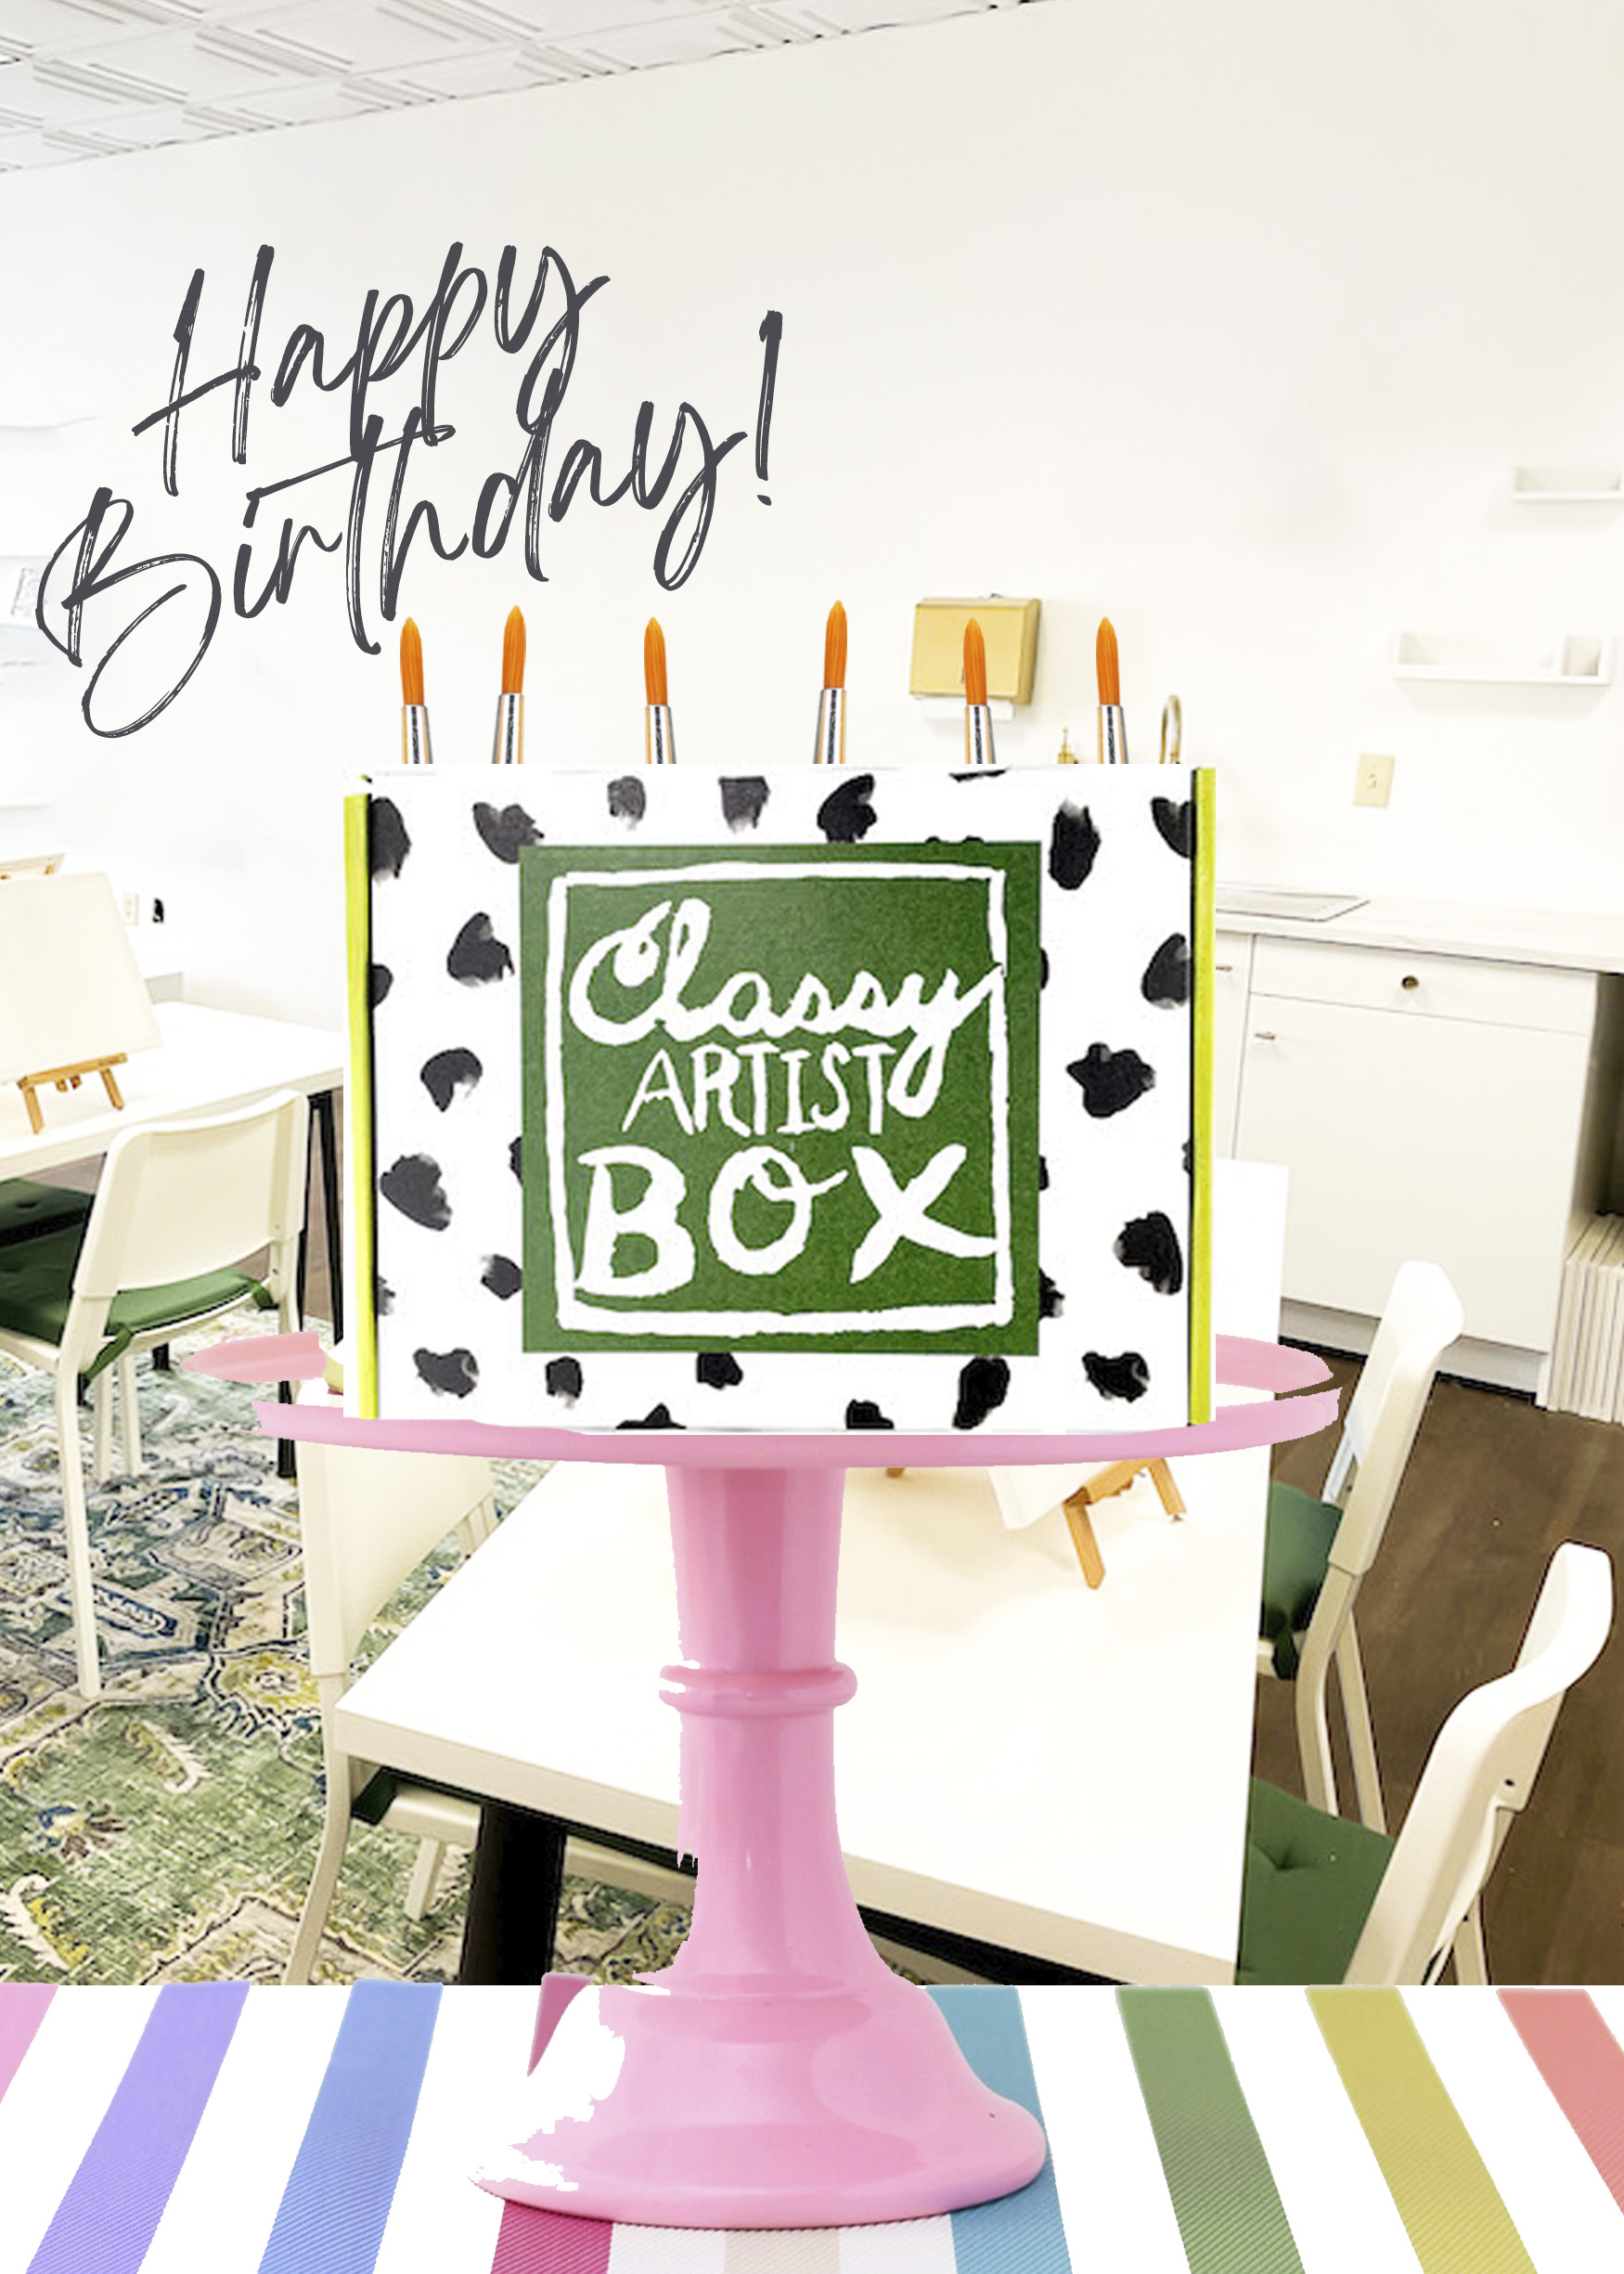 http://classyartistbox.com/wp-content/uploads/2022/10/CAB-Studio-Birthday-Card-Front-5x7-front-of-card.jpg